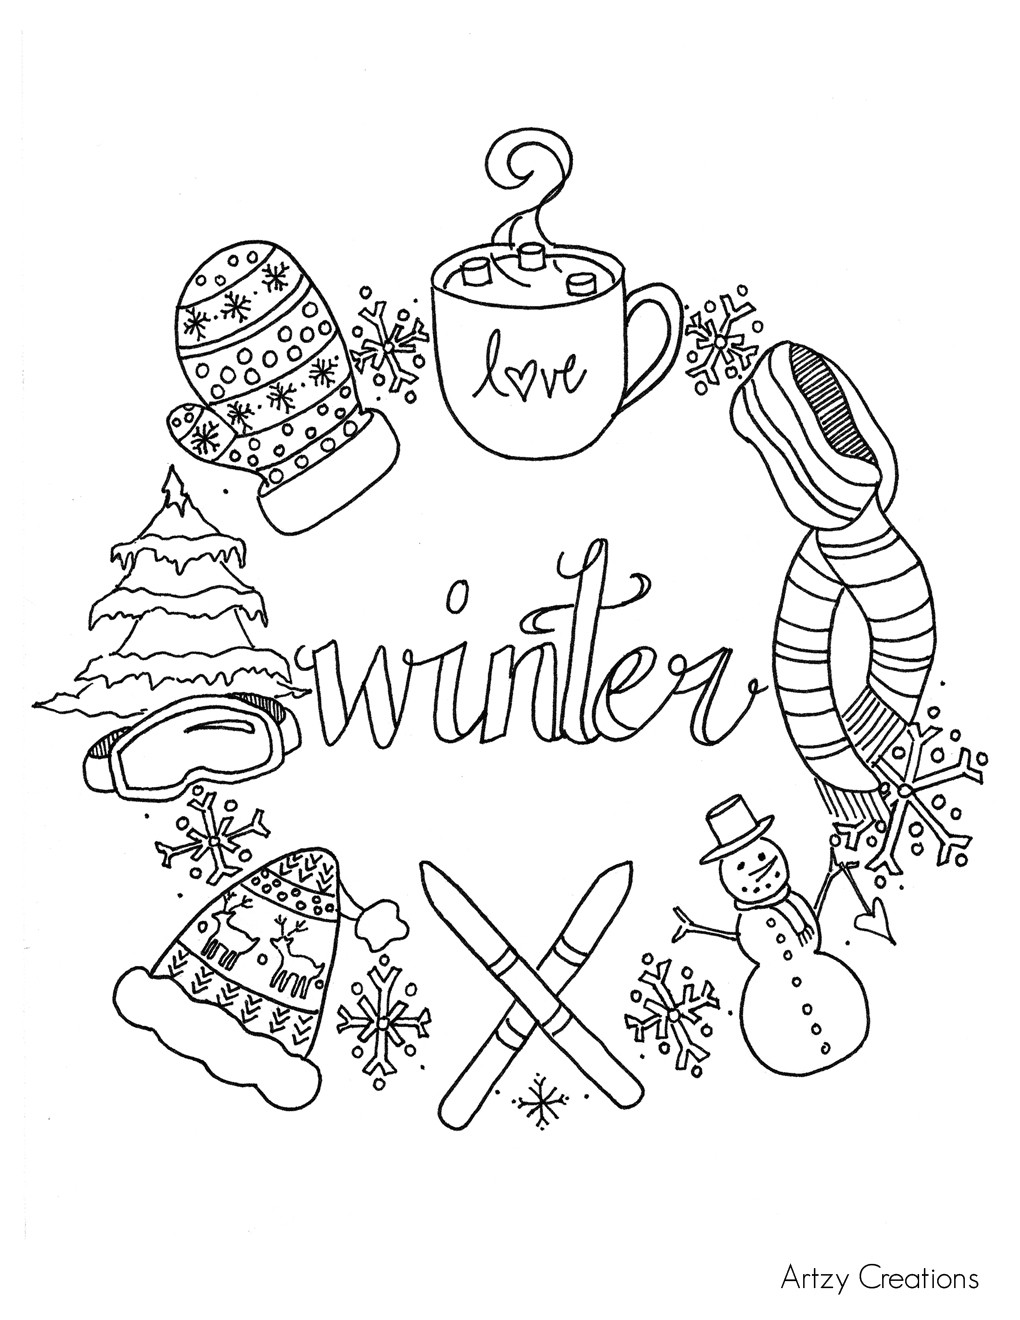 Free Printable Winter Coloring Pages
 Free Winter Coloring Page artzycreations